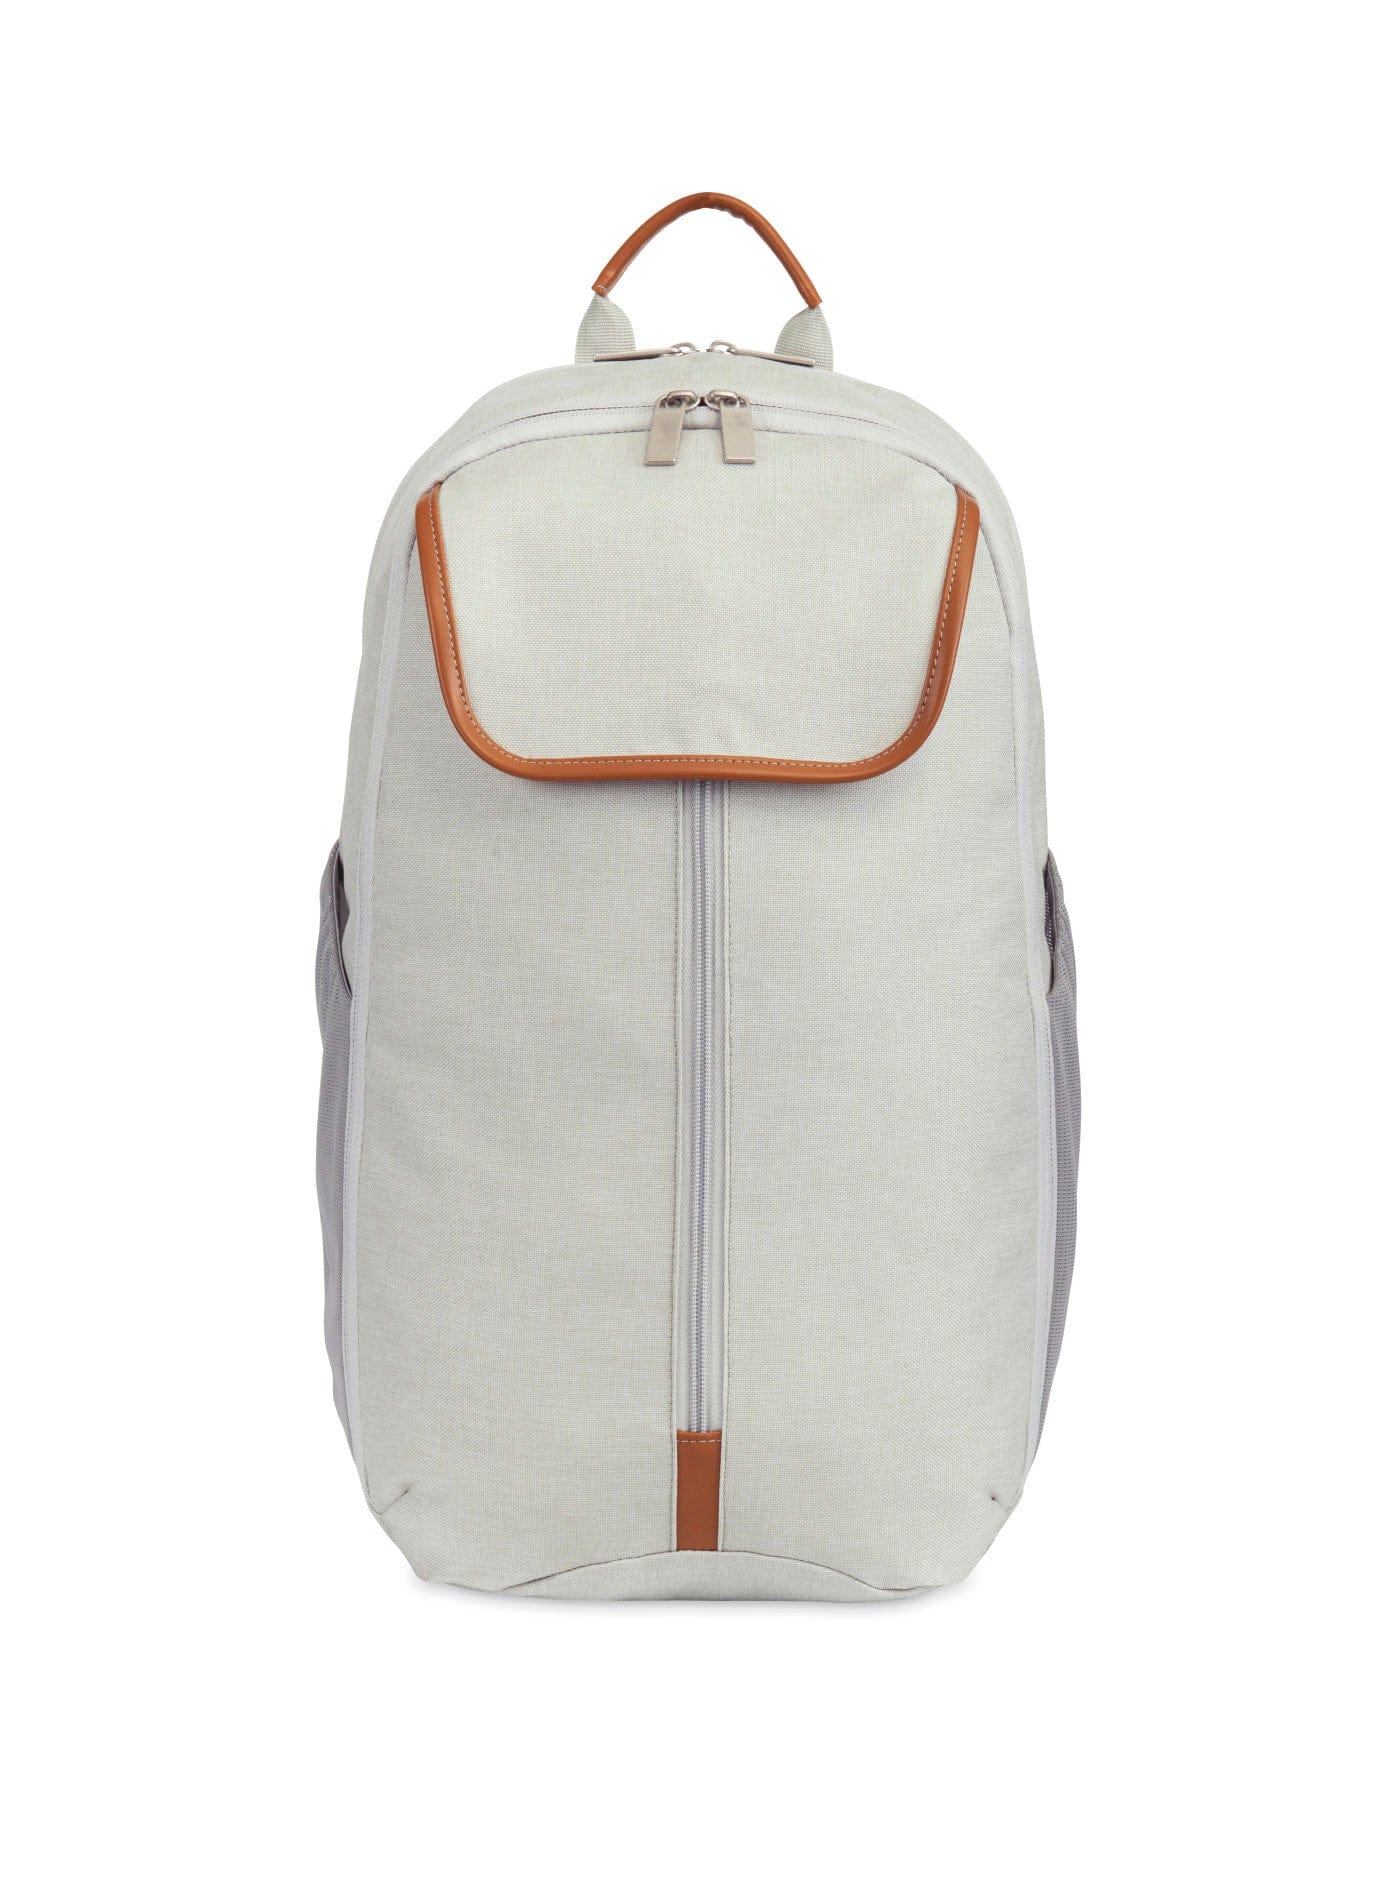 Threadfellows Bags One Size / Quiet Grey Heather Mobile Office Hybrid Computer Backpack